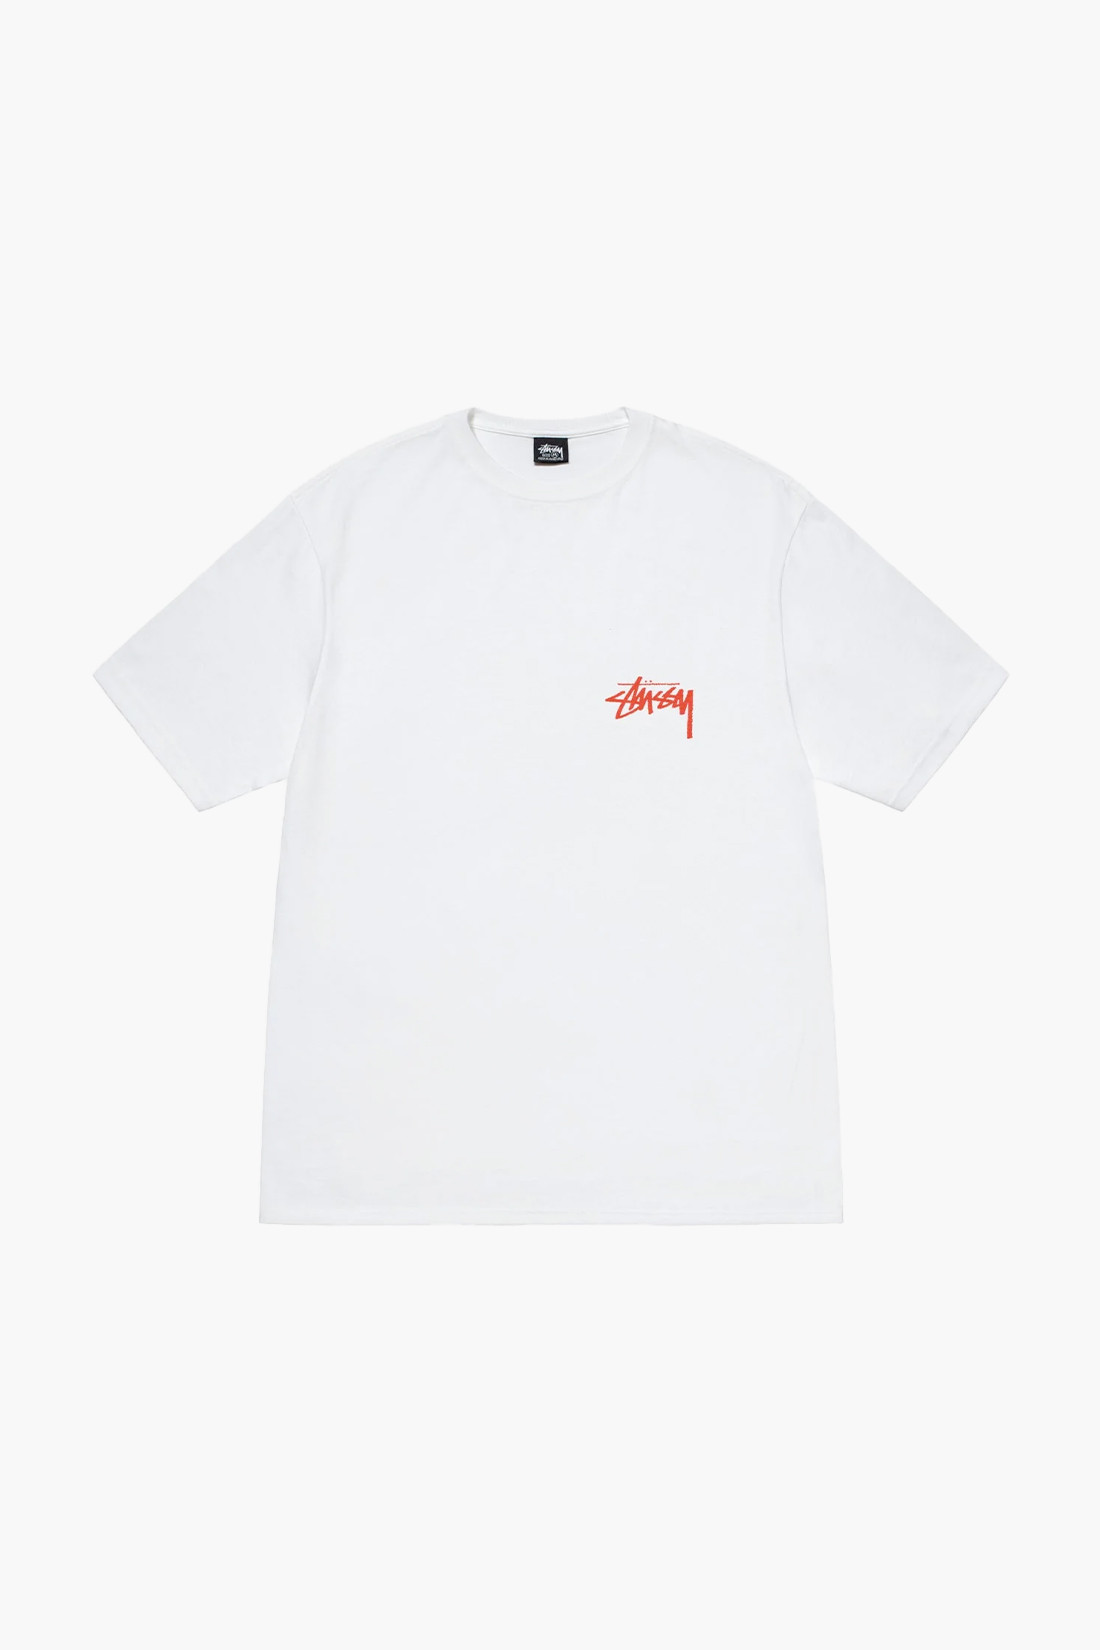 STUSSY - Streetwear Clothing and Accessories, FW23 Collection ...